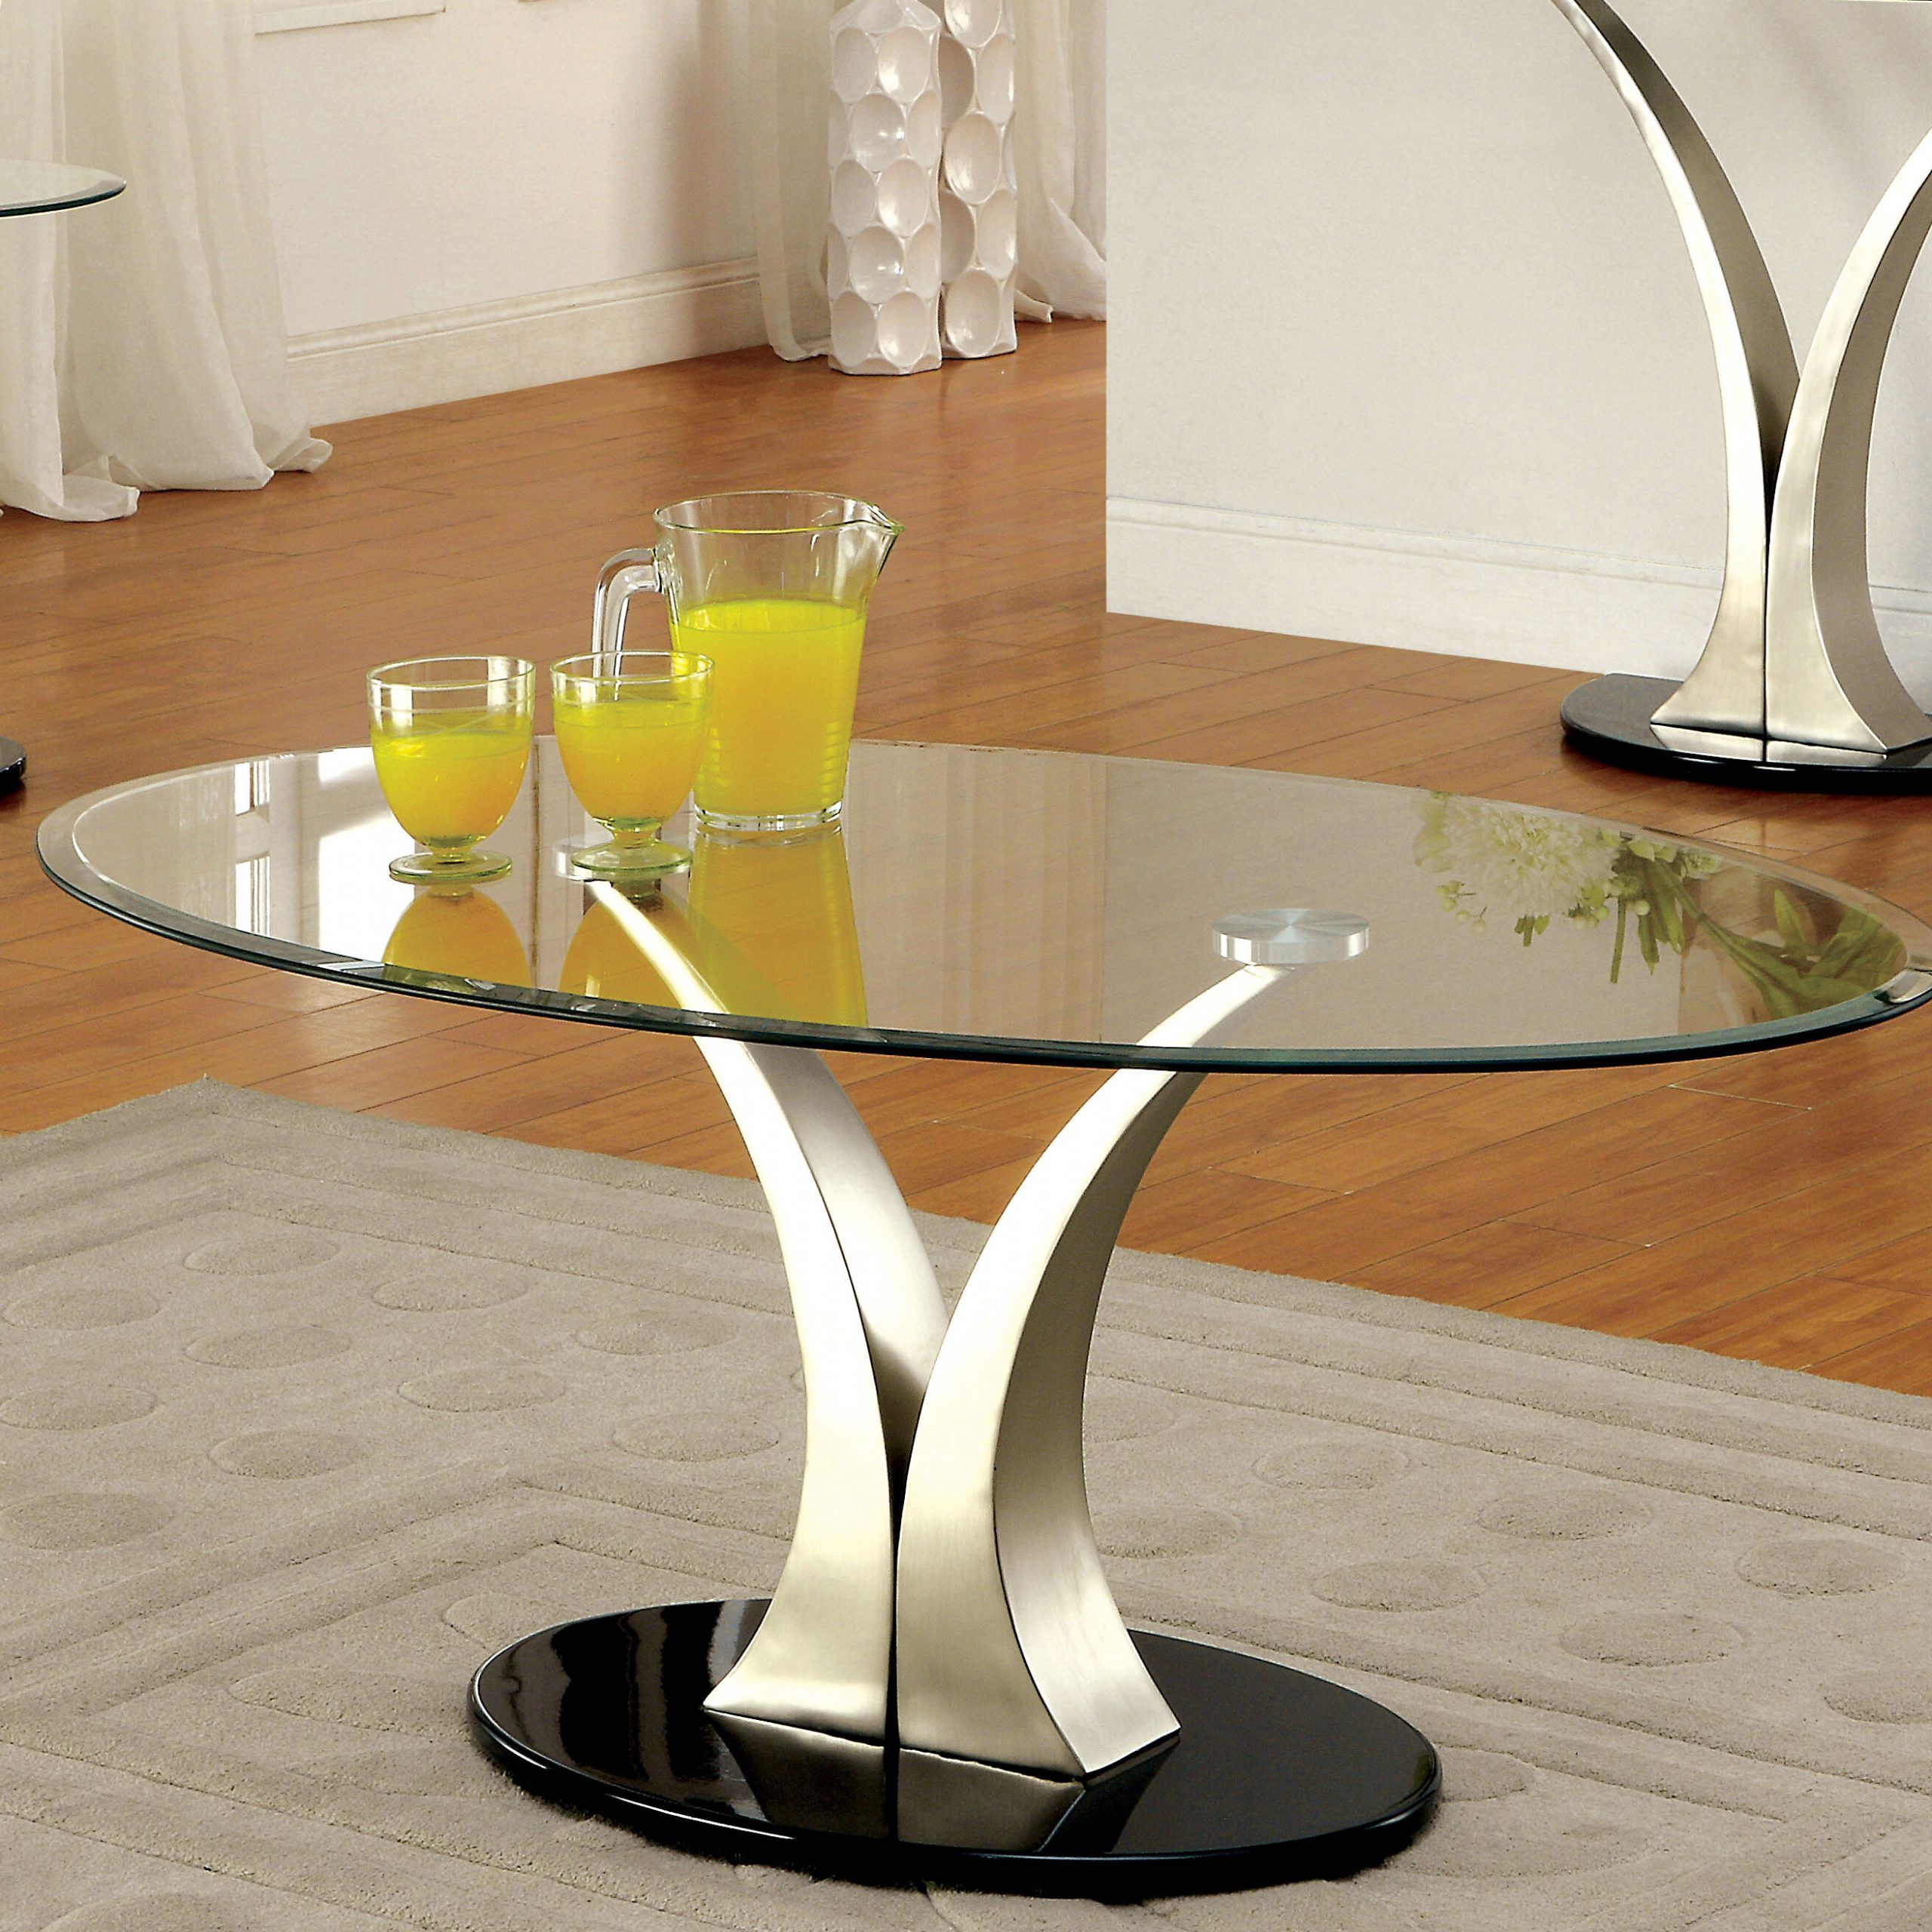 Ivy Bronx Fouts Abstract Coffee Table & Reviews | Wayfair Regarding Glass Oval Coffee Tables (View 19 of 20)